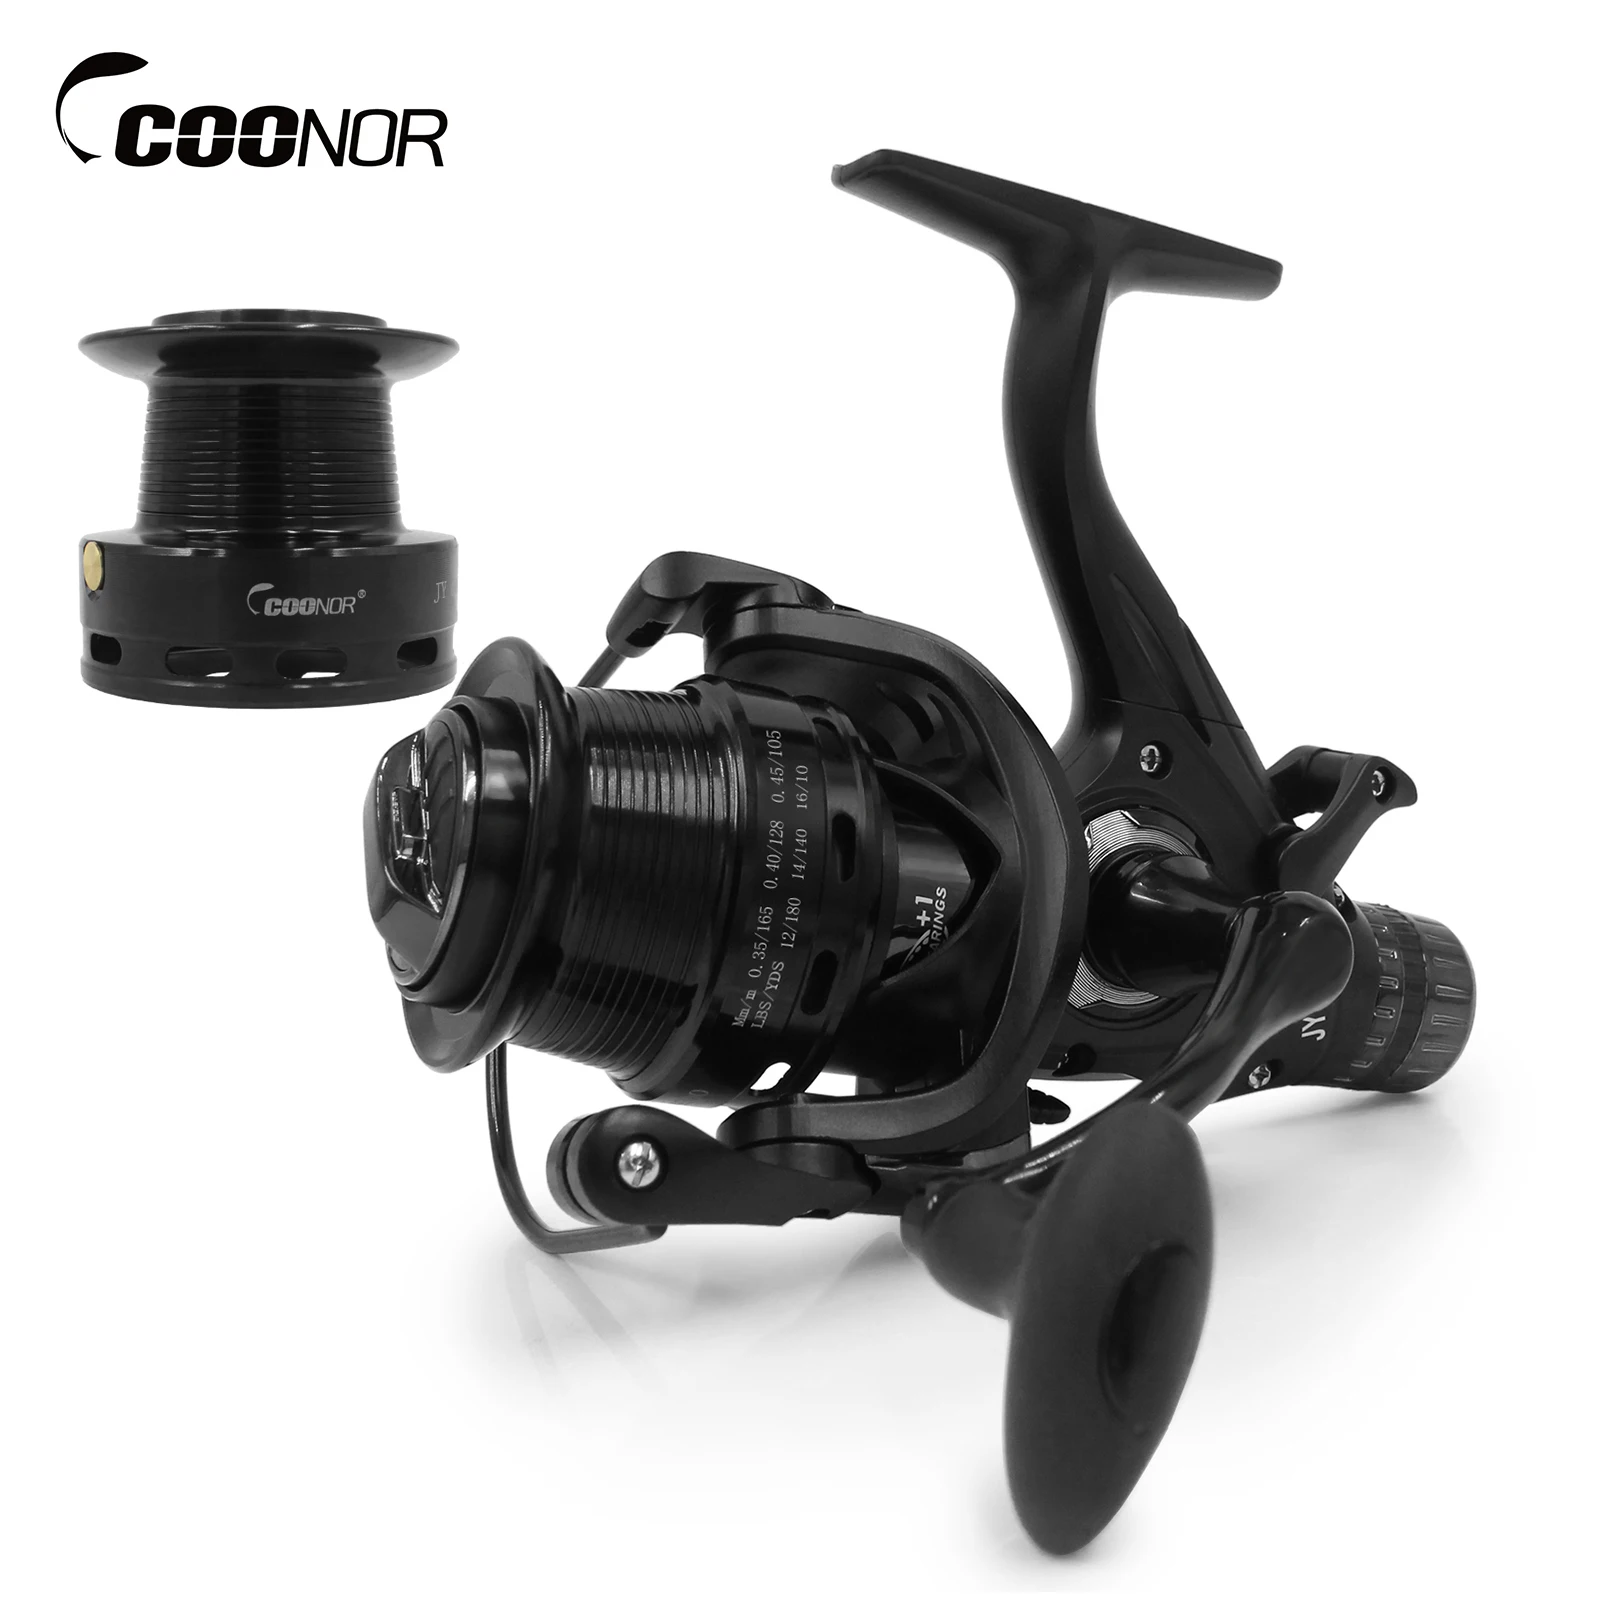 

Coonor 9+1BB Speed Ratio Fishing Reel w Dual Brake System Smooth Spinning Reel Dual Spool Interchangeable Handle Fishing Tackle